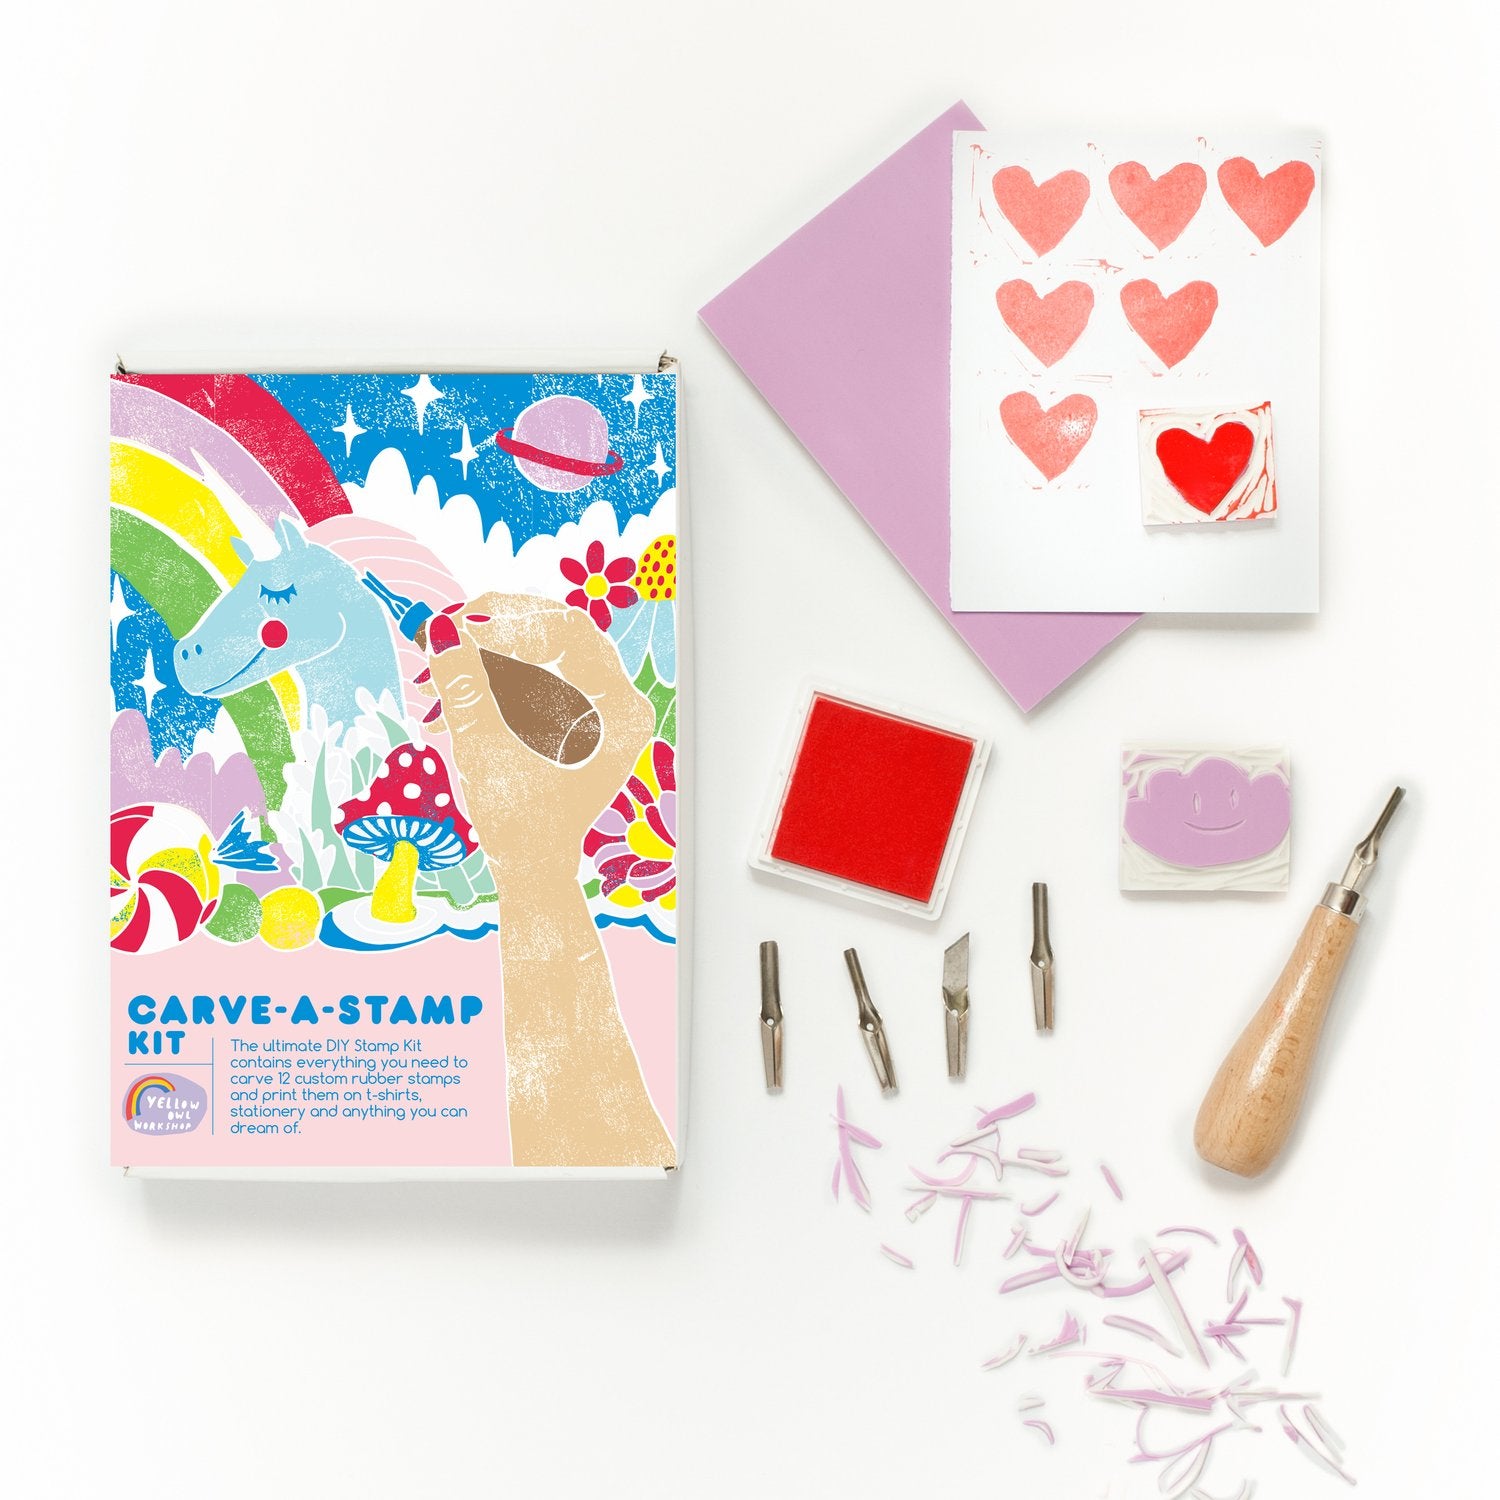 Yellow Owl Workshop Gift Carve A Stamp Kit